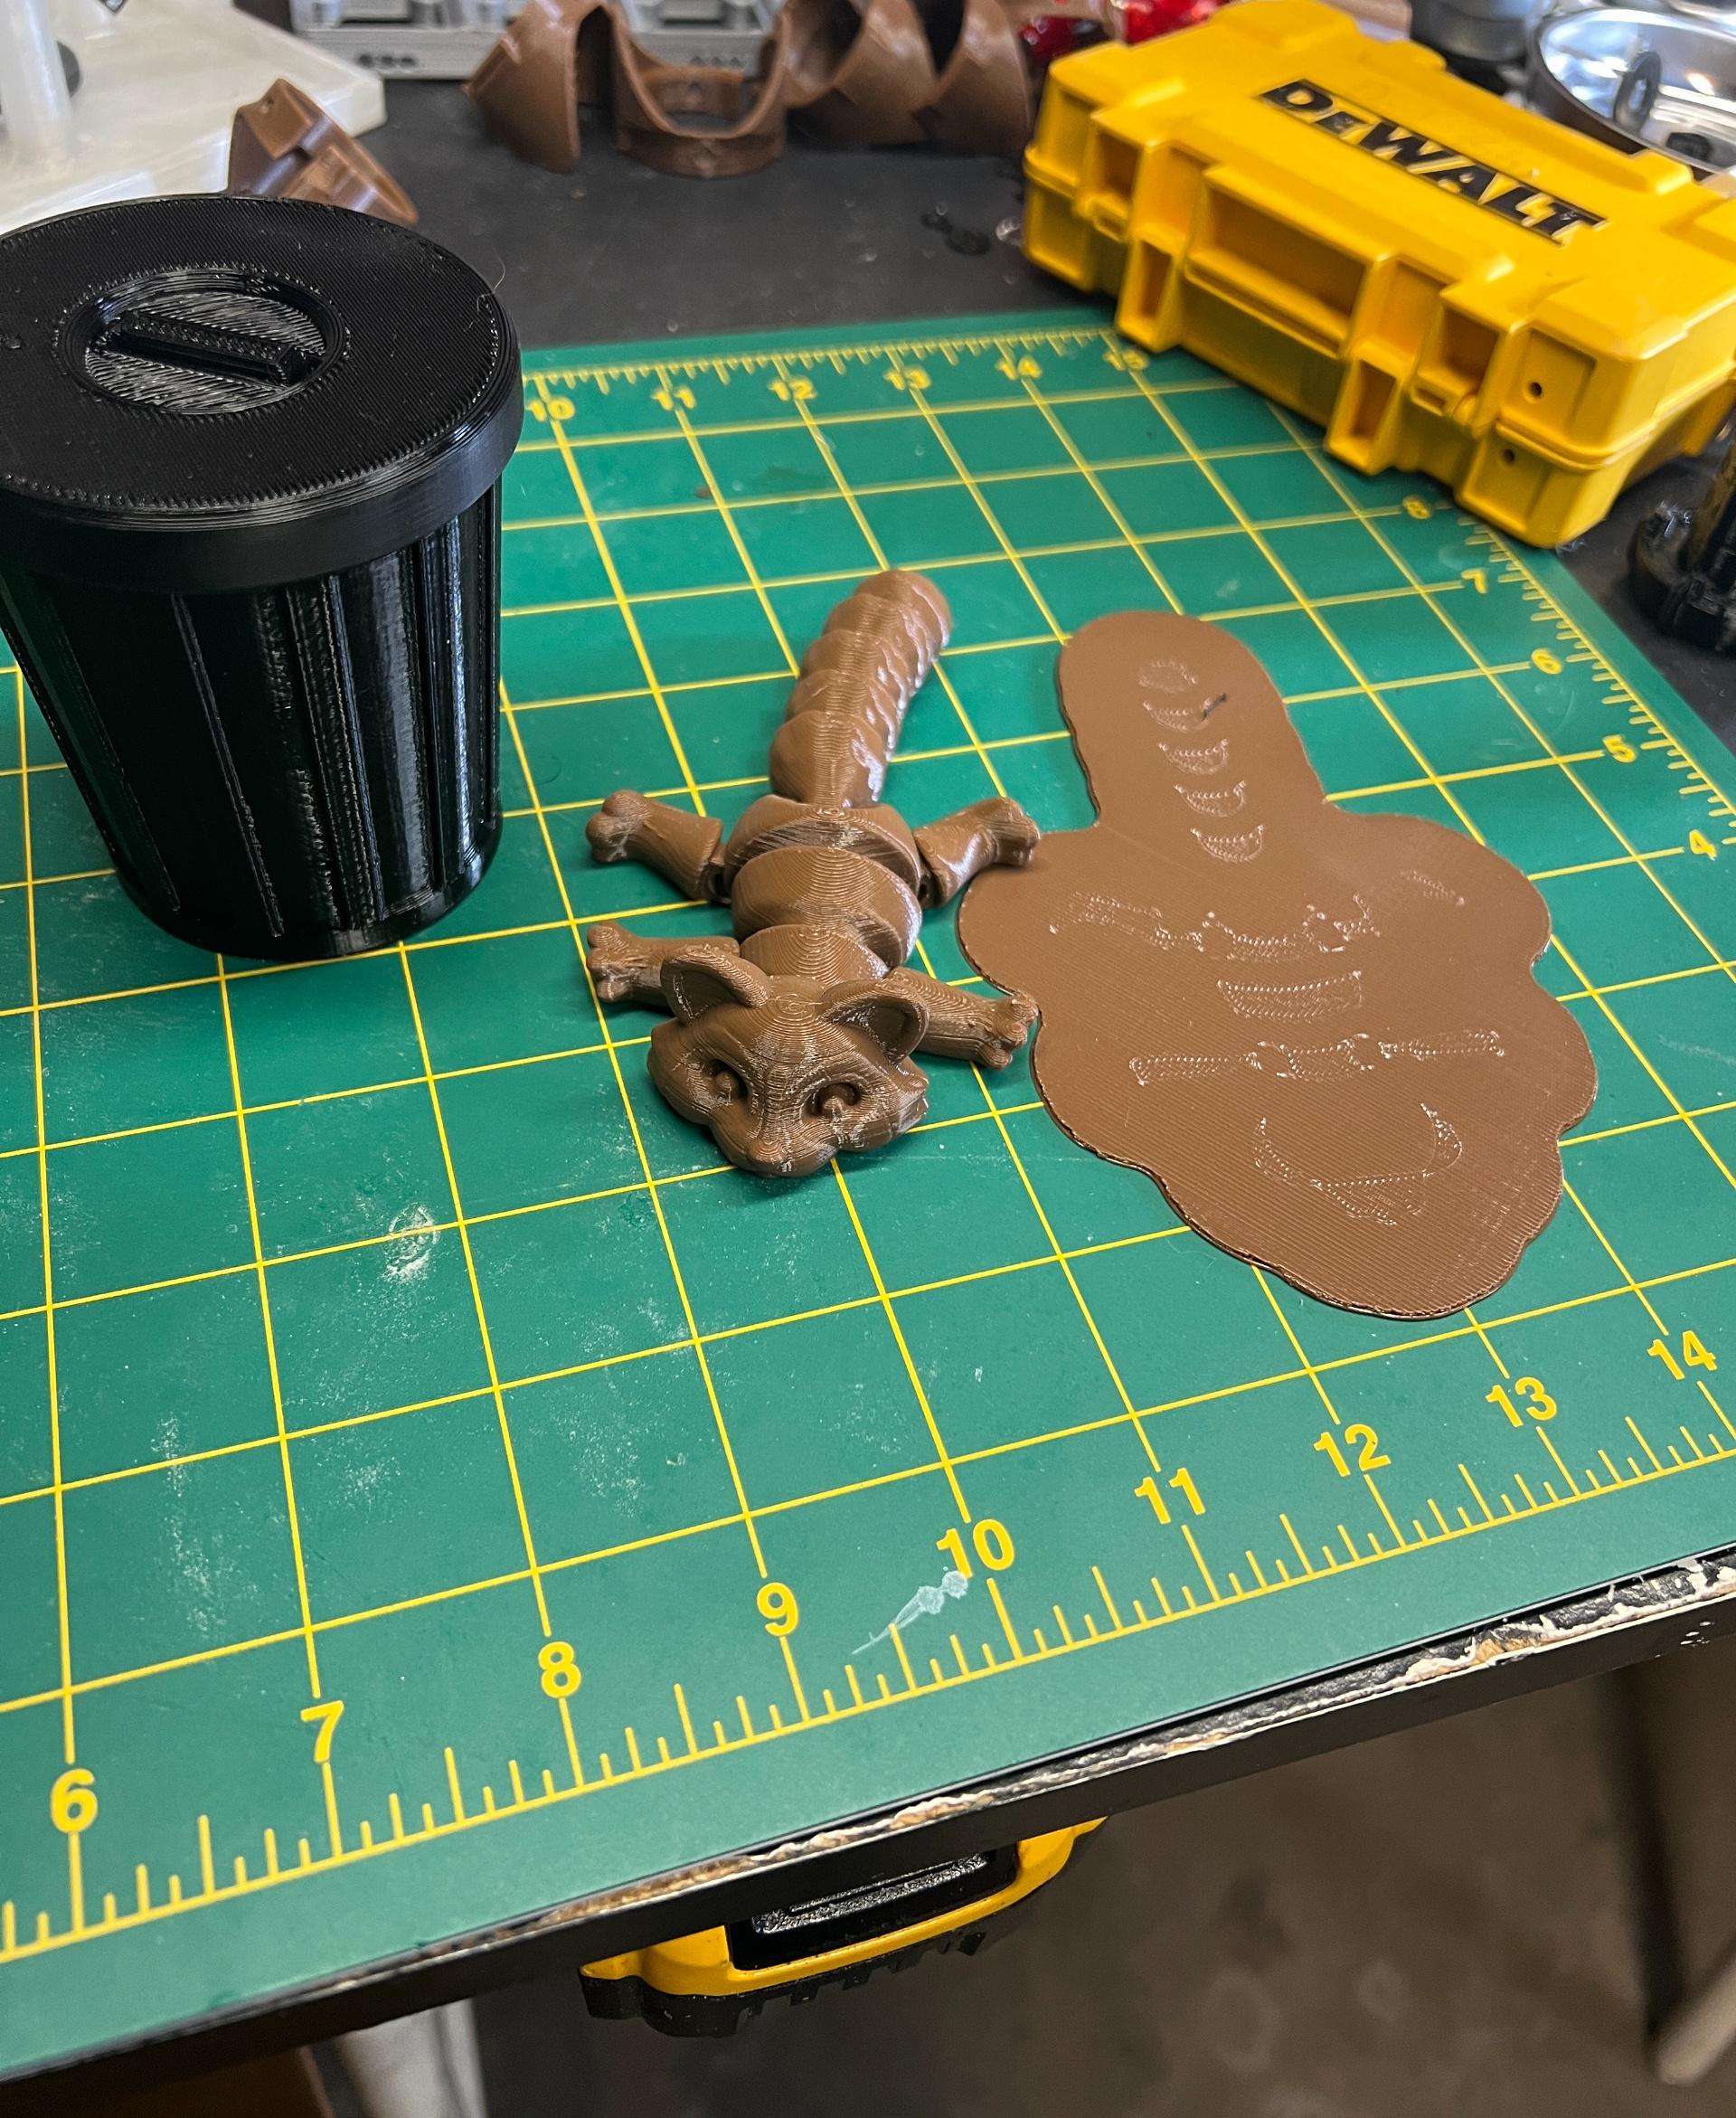 Articulated Racoon - Raft came off with no issue! Default Cura raft settings. I used Chep's Cura good .2 profile - 3d model